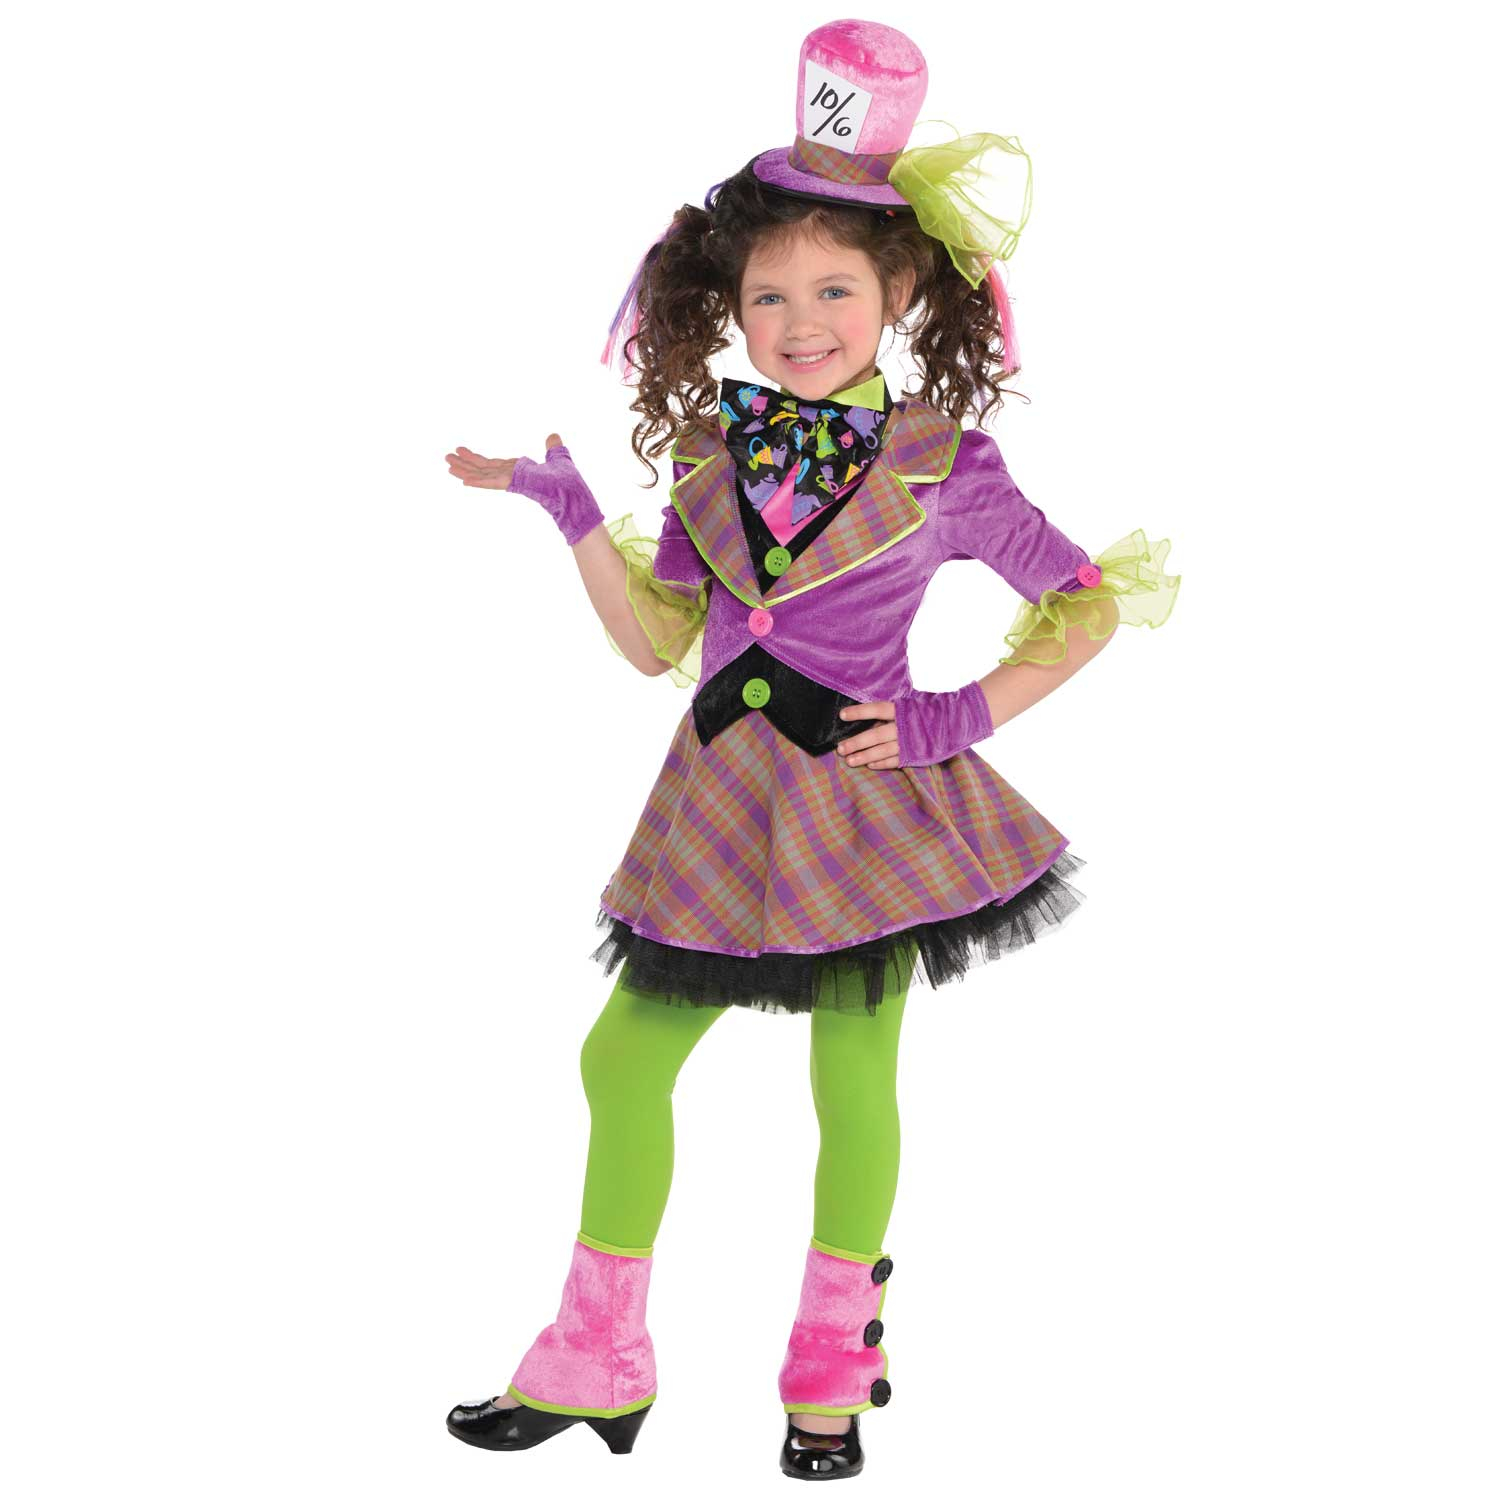 Mad Hatter Costume - Age 8-10 Years - 1 PC : Amscan International